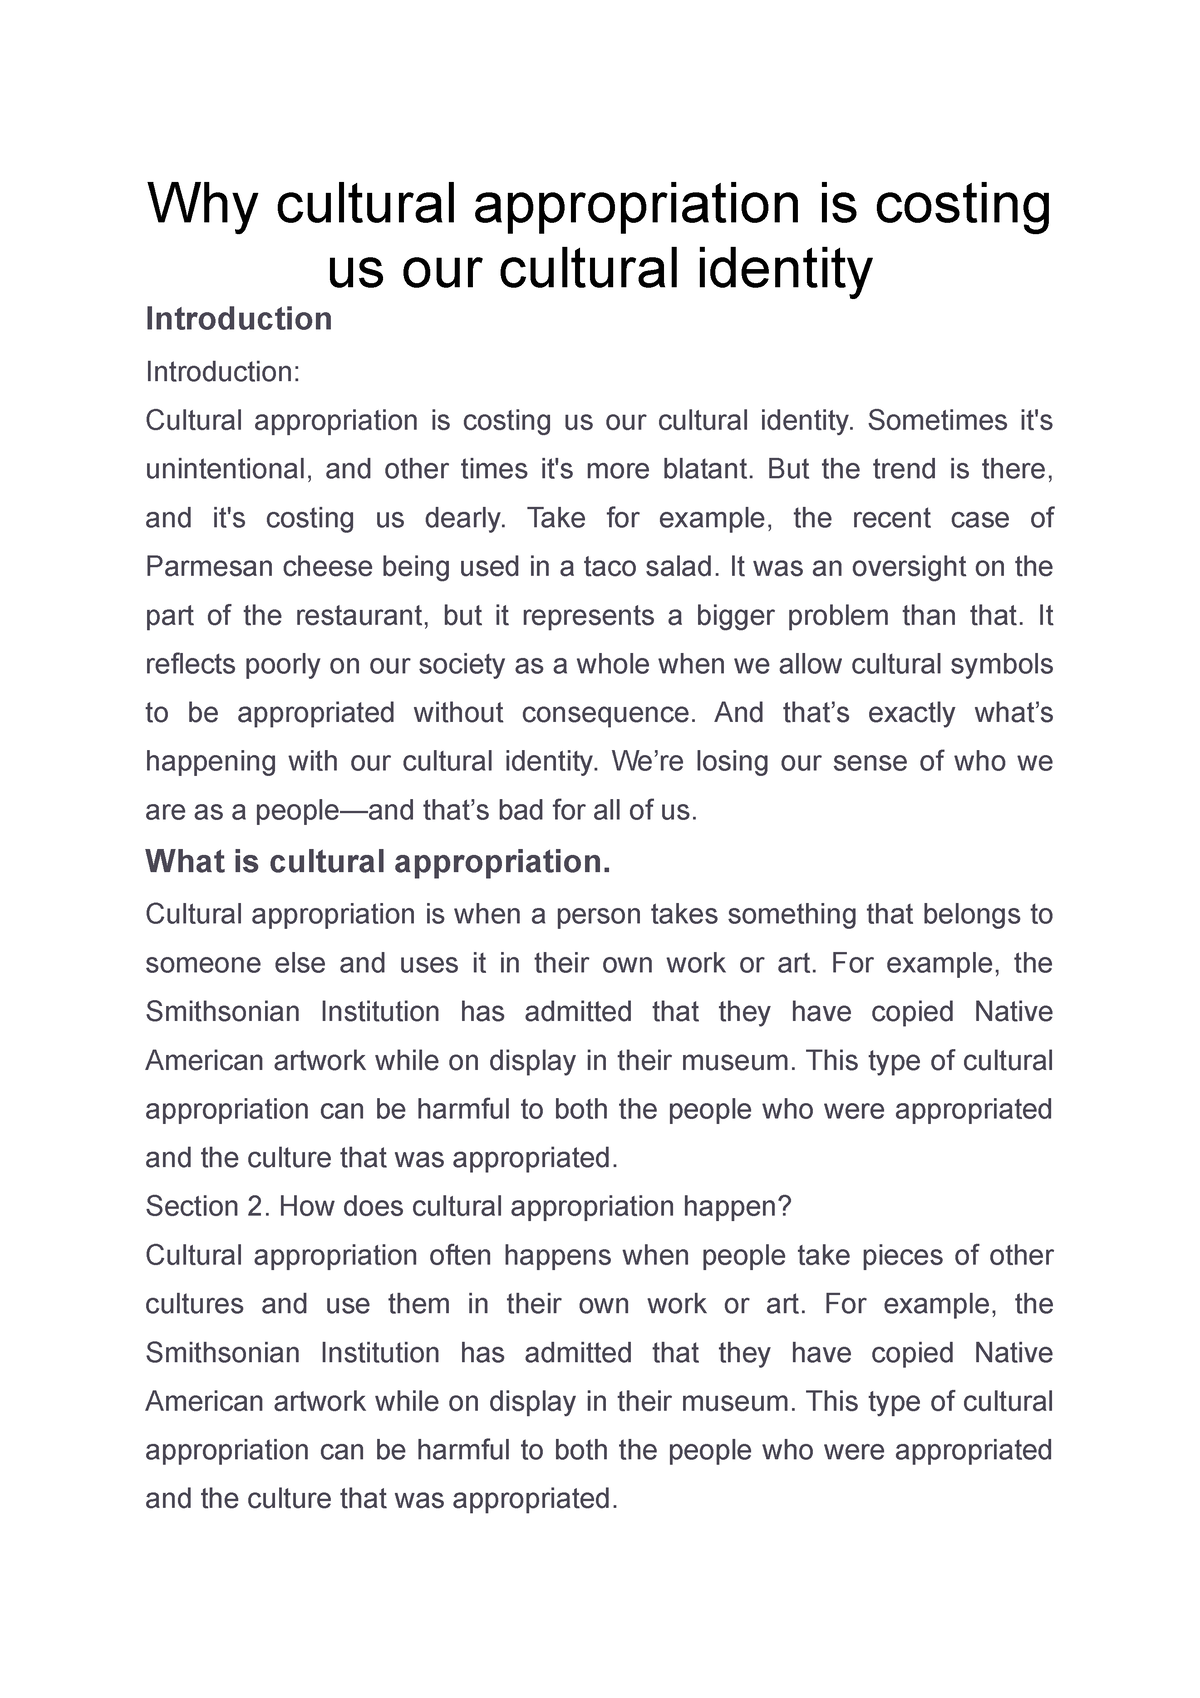 thesis statement about cultural appropriation